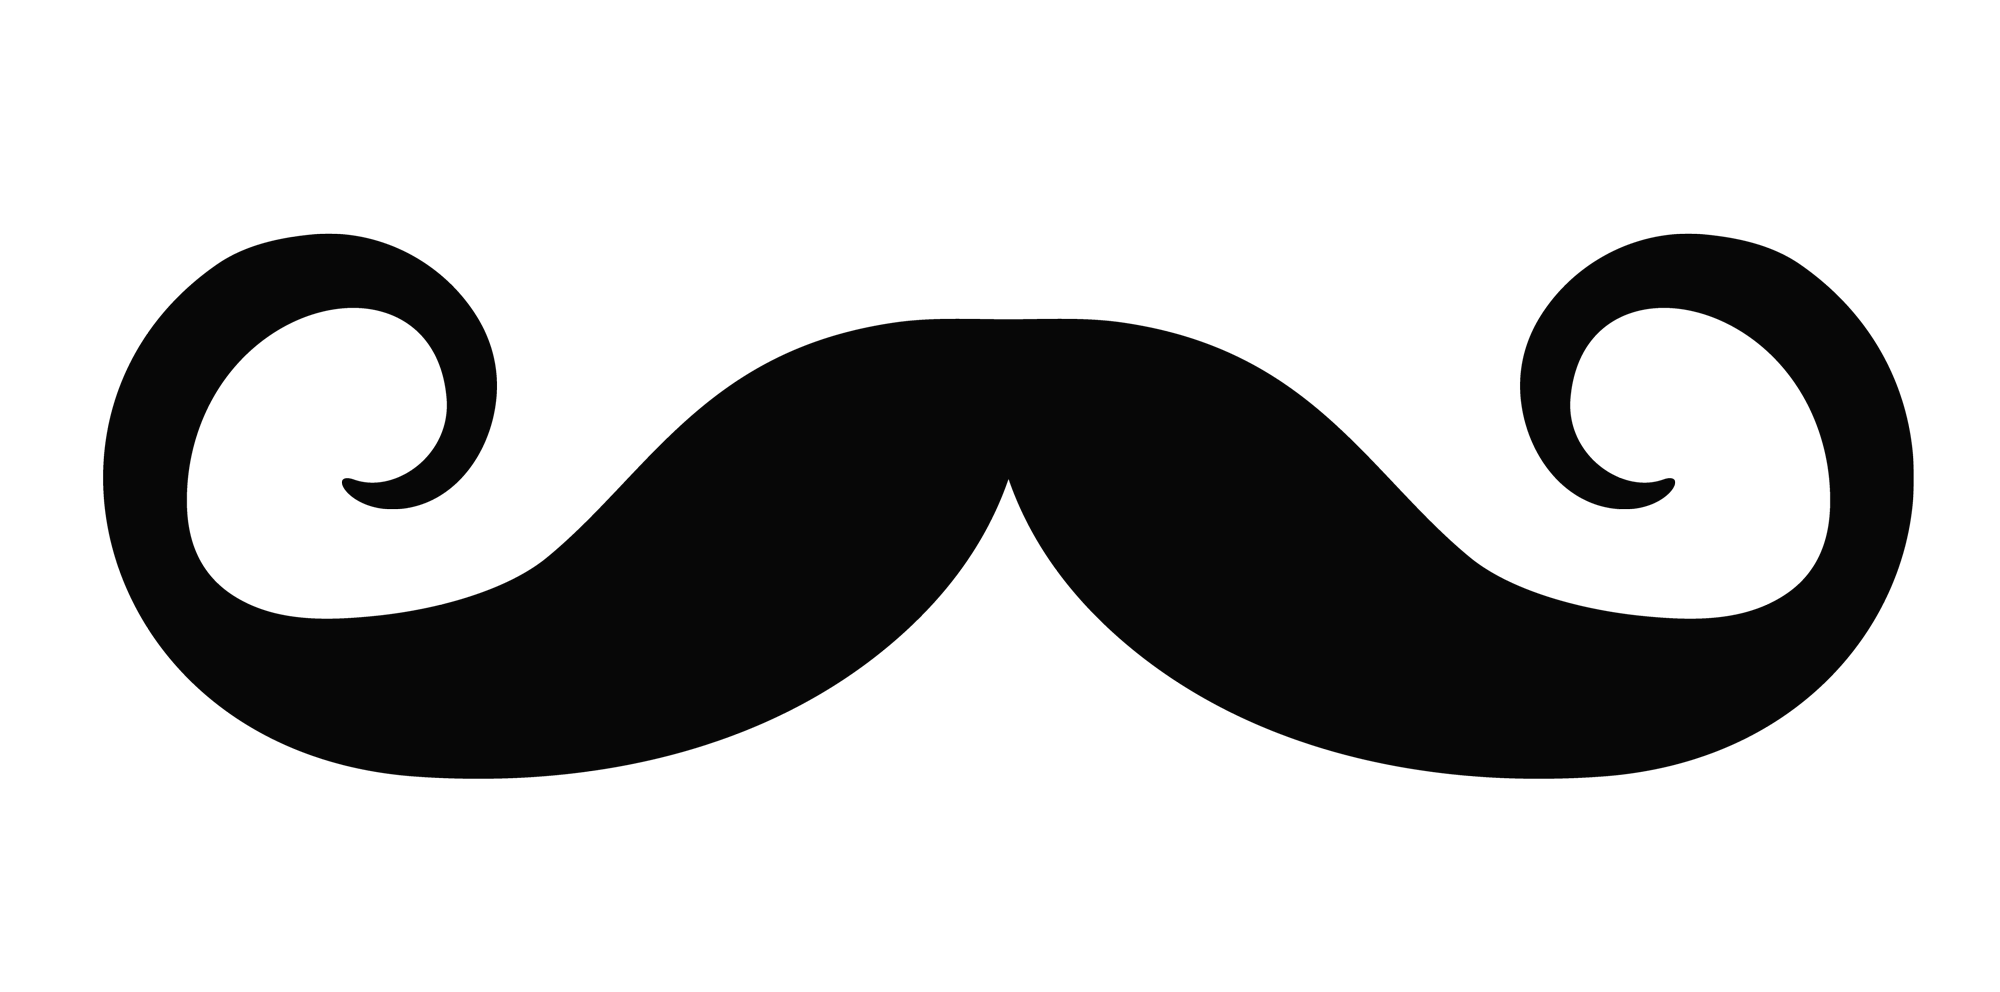 Monocle clipart mustache beard, Monocle mustache beard Transparent FREE for download on WebStockReview 2020